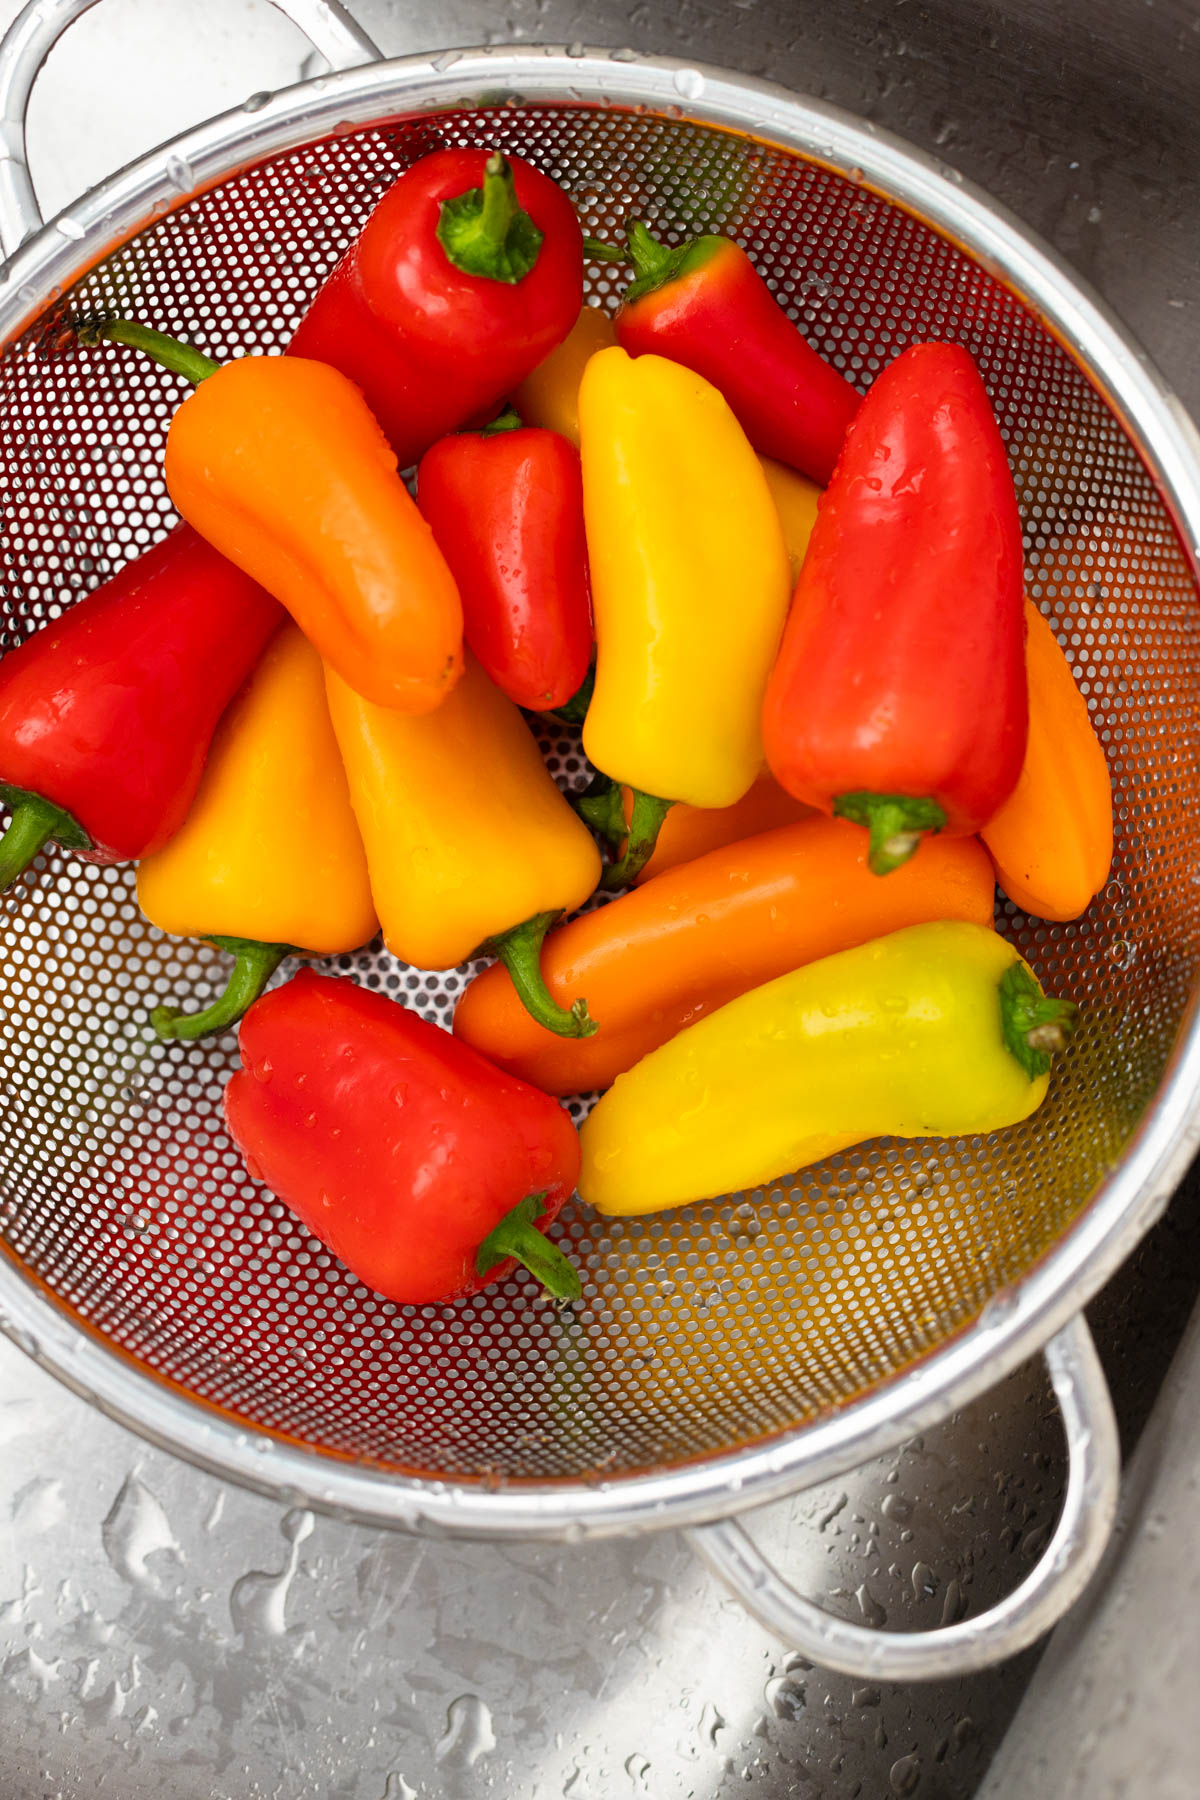 The sweet peppers are in a colander in the sink.